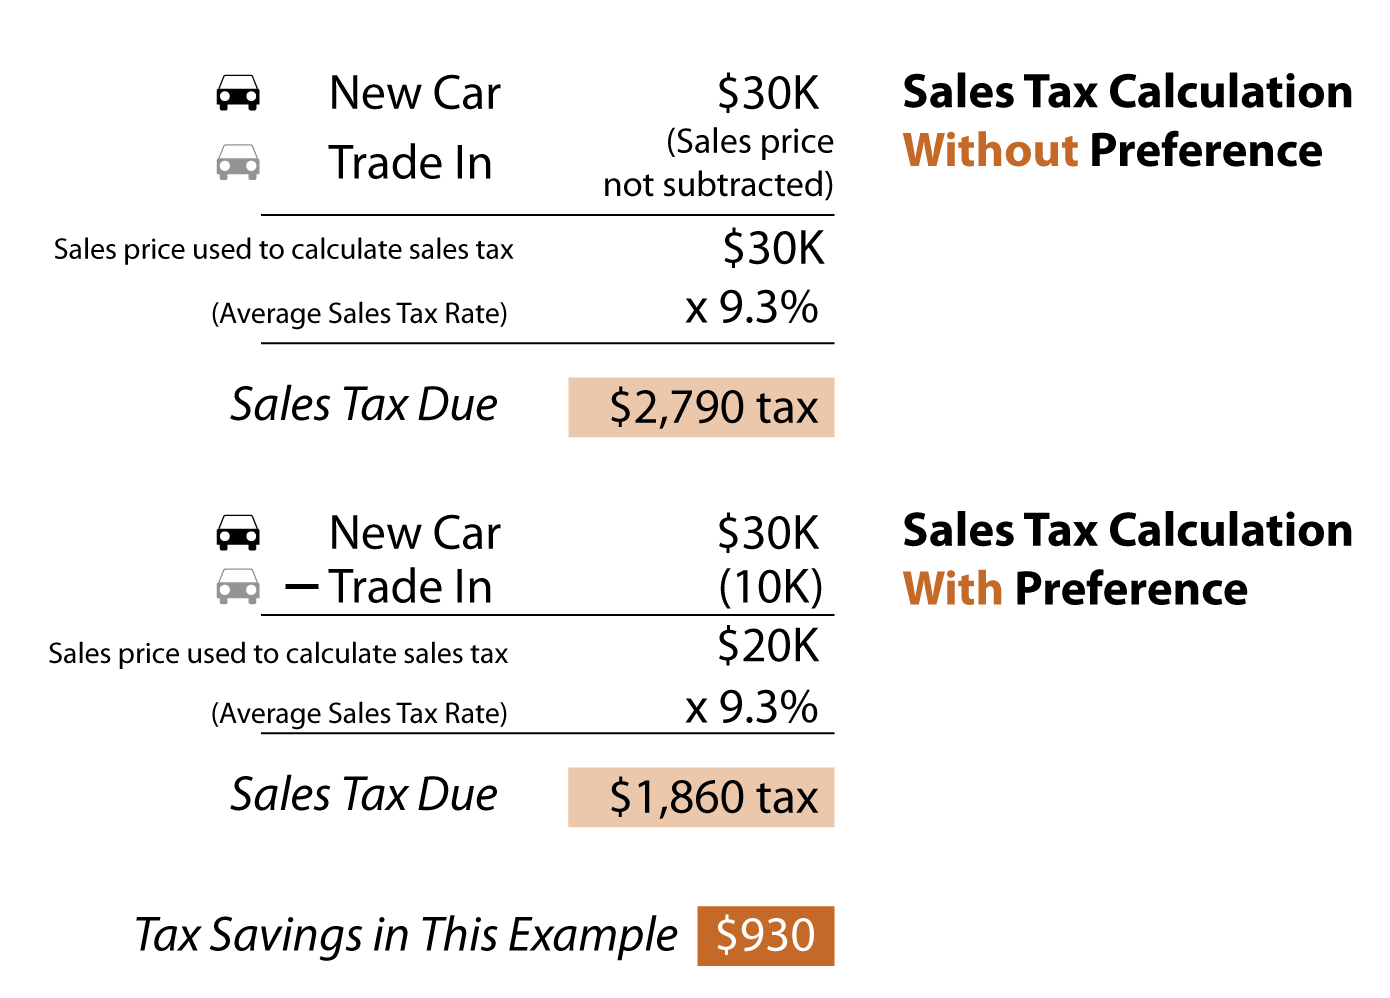 Graphic displays the manner by which the trade-in tax preference reduces the selling price of goods, upon which sales tax is calculated.